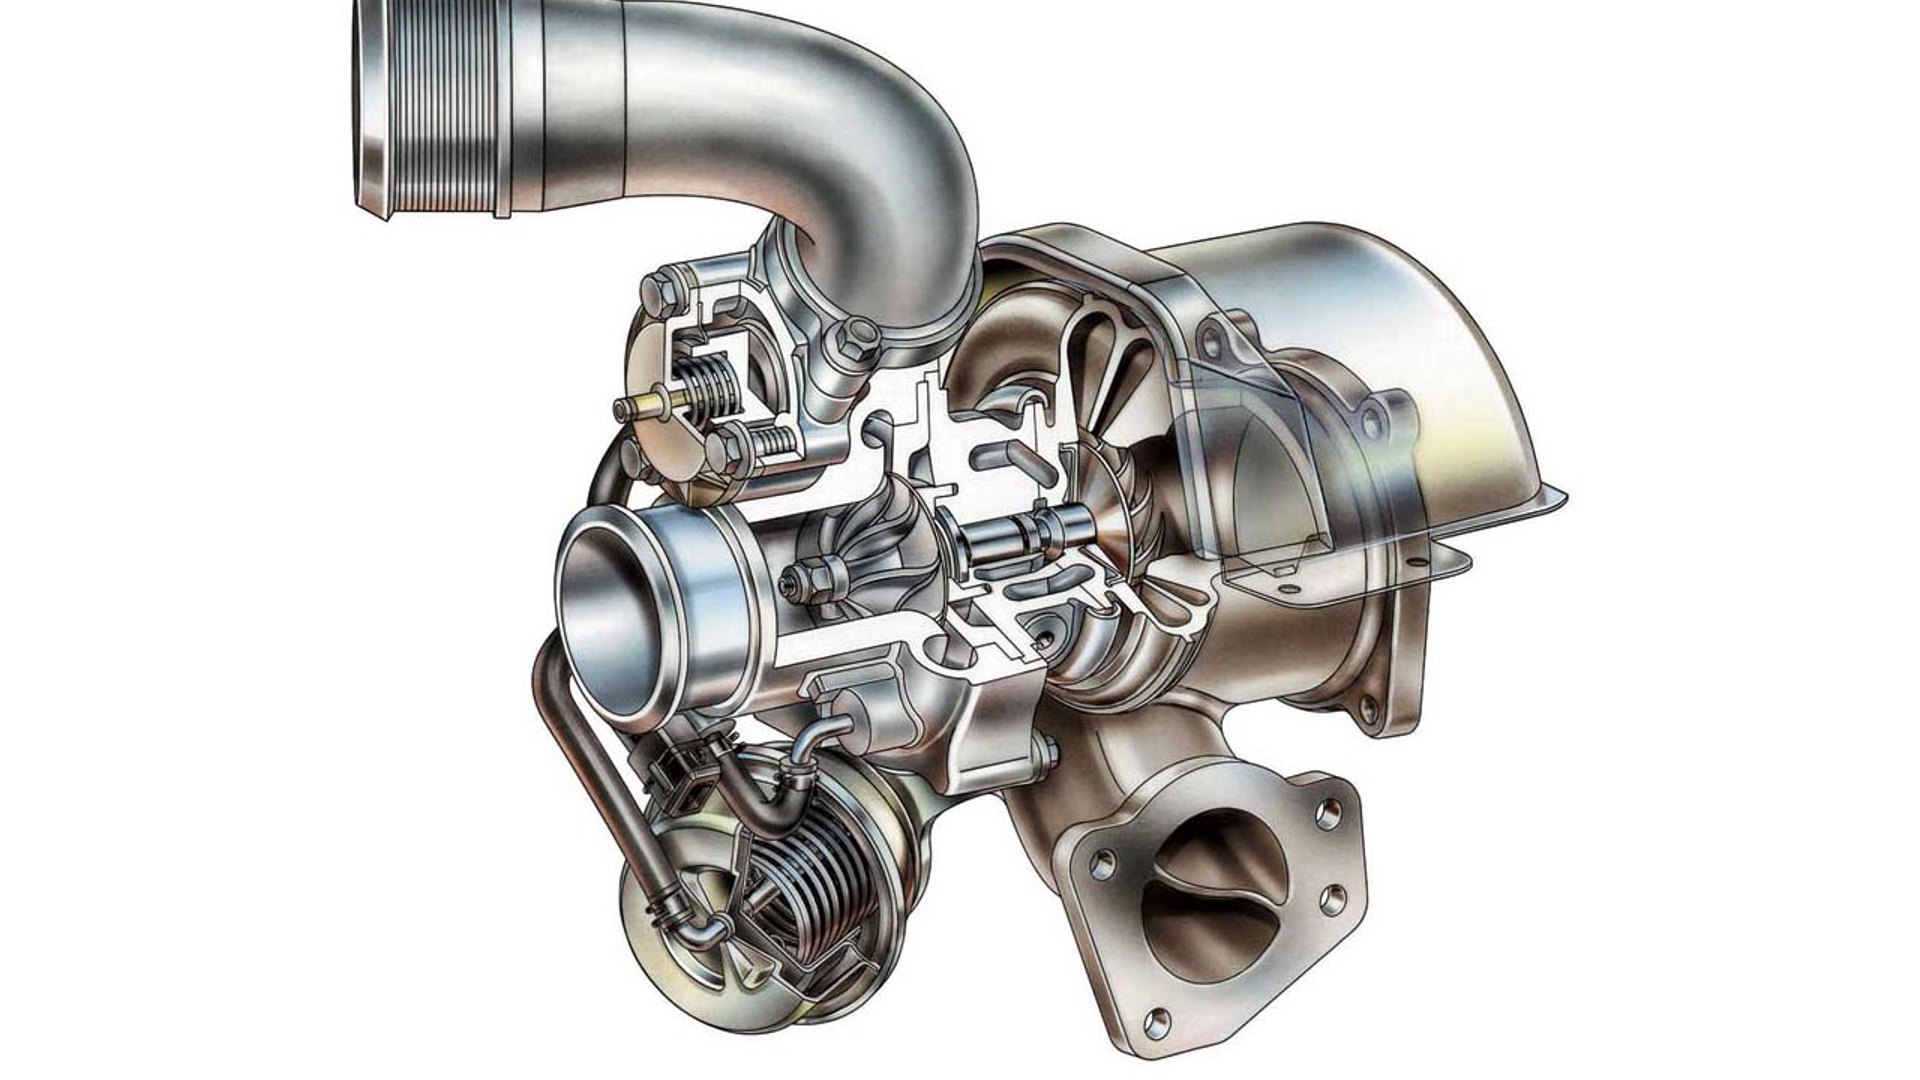 Using a turbocharger or supercharger to ‘boost’ an engine's power, thereby making a smaller engine perform like a larger one, is one of the oldest go-fast tricks in the book. It’s even more relevant nowadays, as fuel savings are realized by offsetting some of the engine’s output to a turbocharger or supercharger, rather than simply using a bigger, thirstier engine. <br><br>Using boost generates the on-demand power drivers want, with reduced fuel consumption when they’re driving gently. In a nutshell, using a smaller, boosted engine instead of a larger one means drivers will burn less fuel, more of the time, with no compromise in performance.